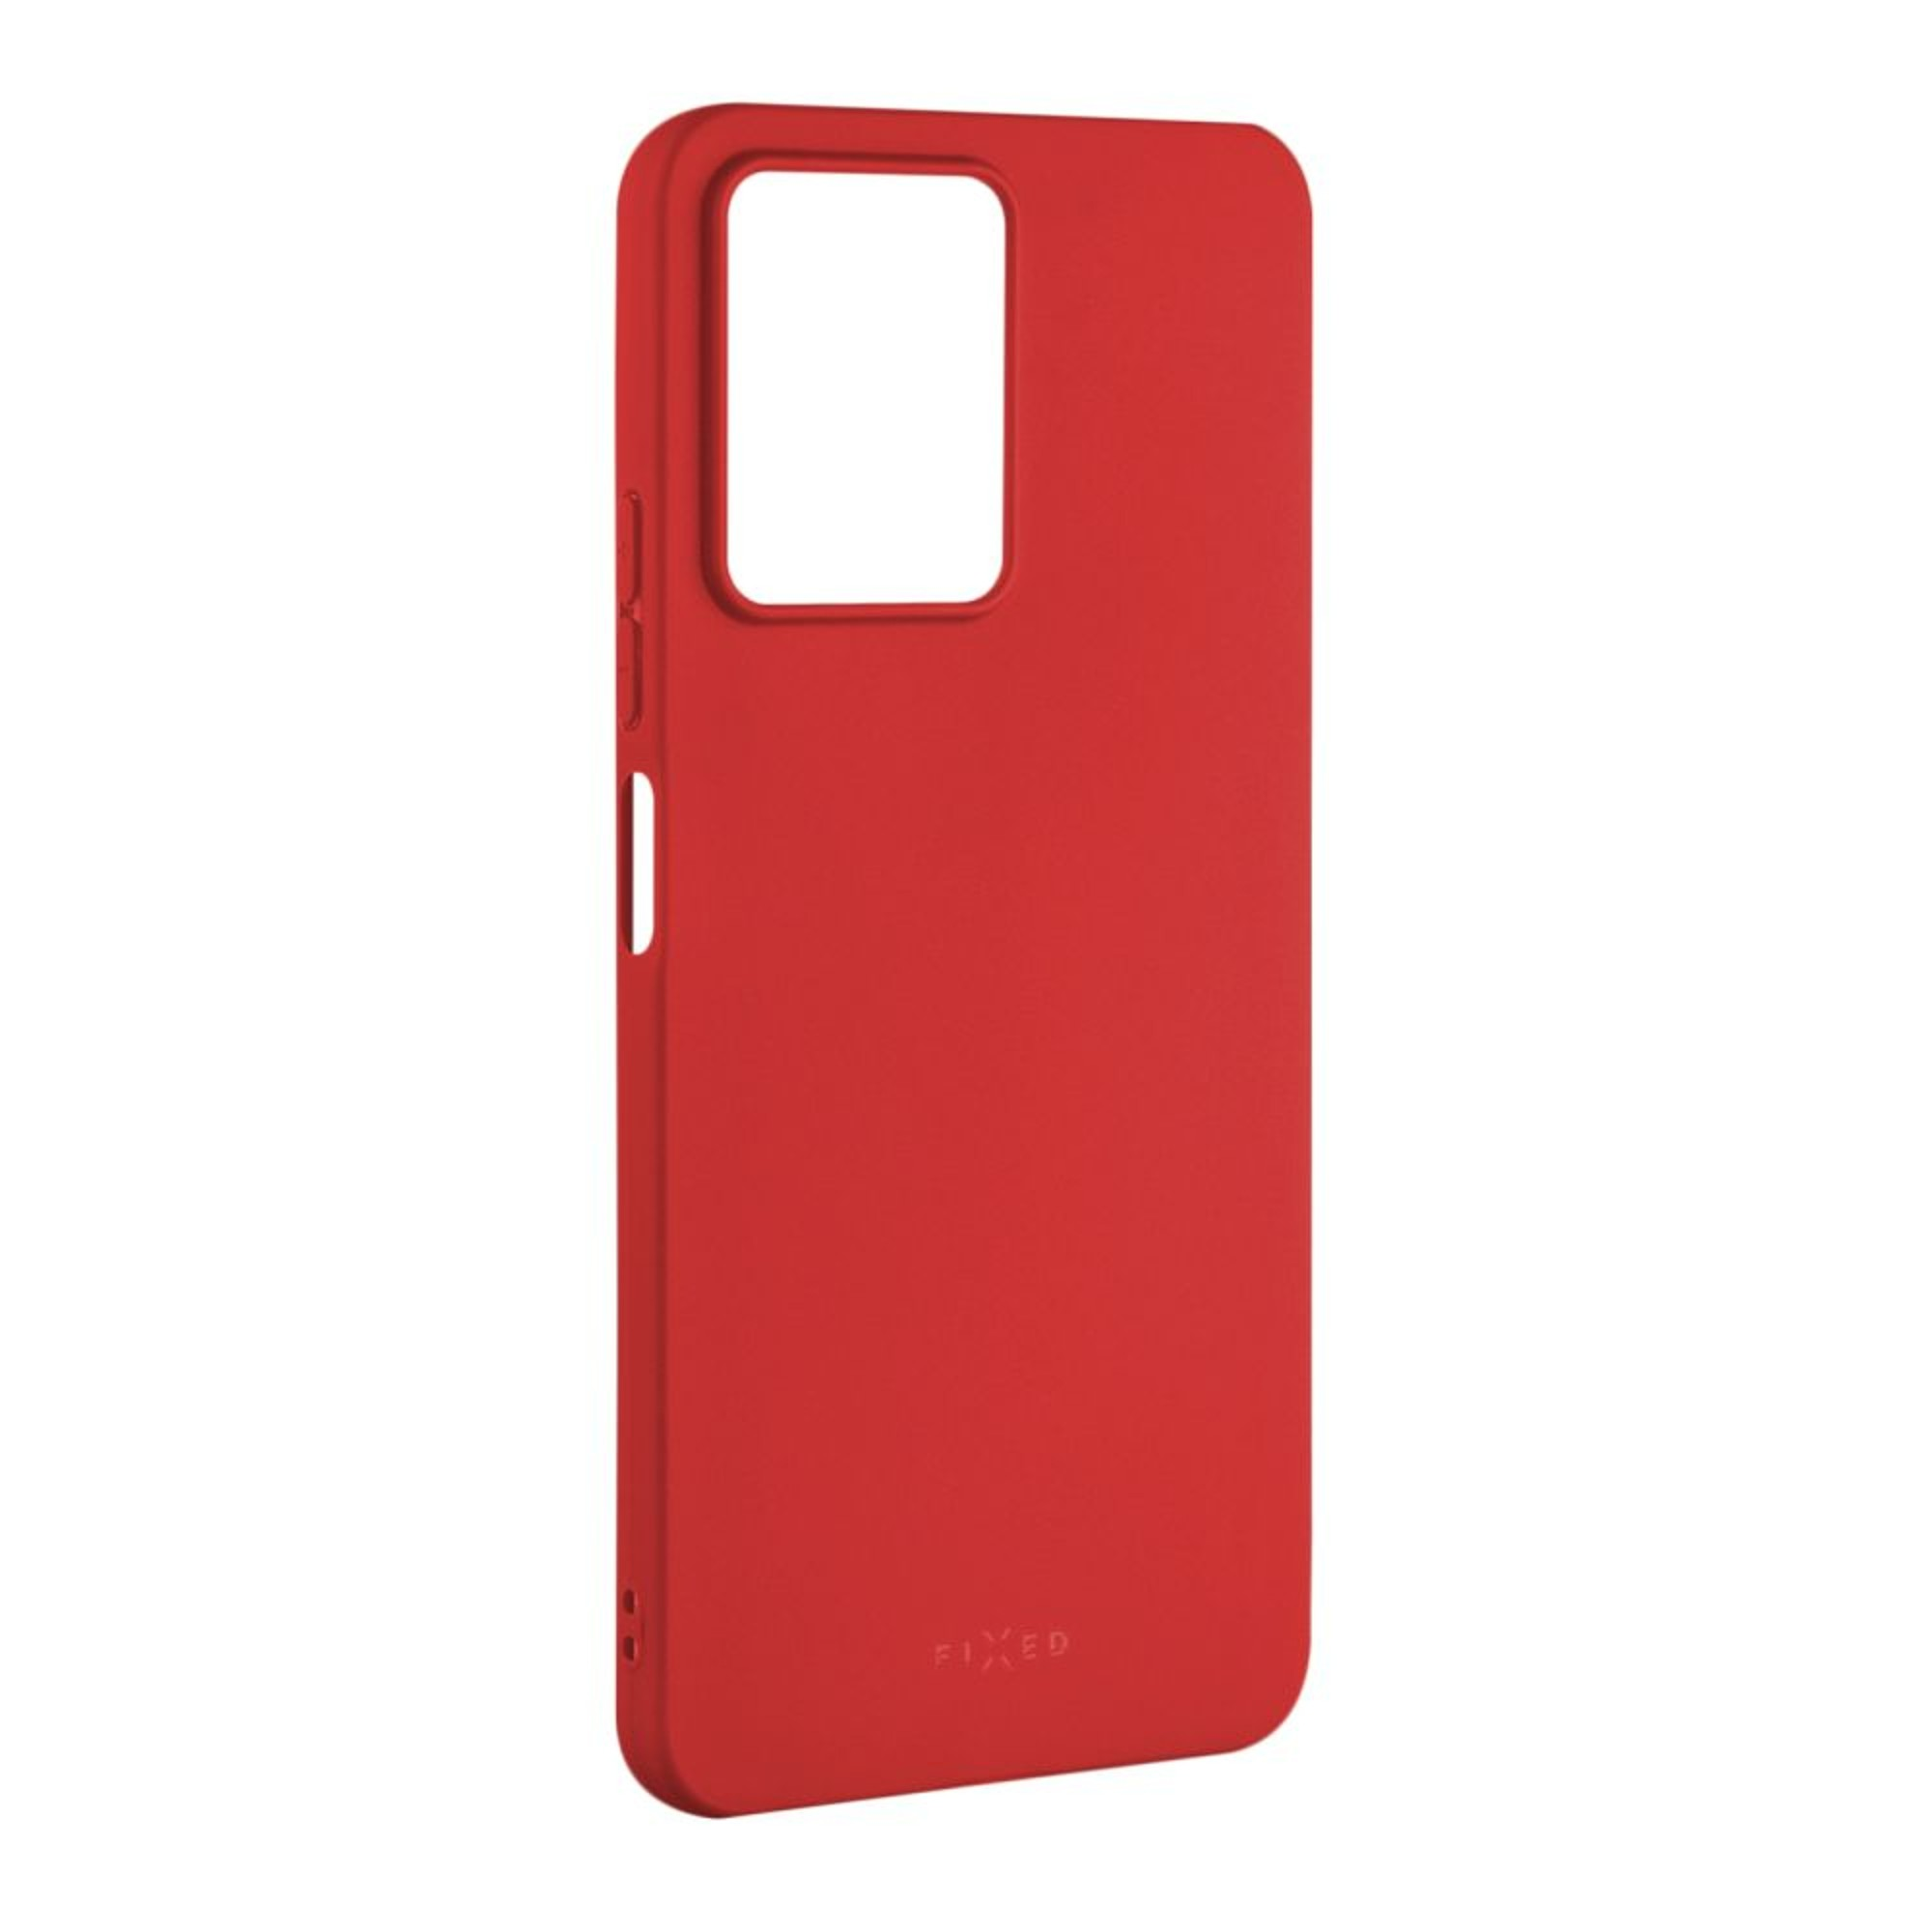 Note Redmi Rot Backcover, Story FIXED FIXST-955-RD, 12, Xiaomi,